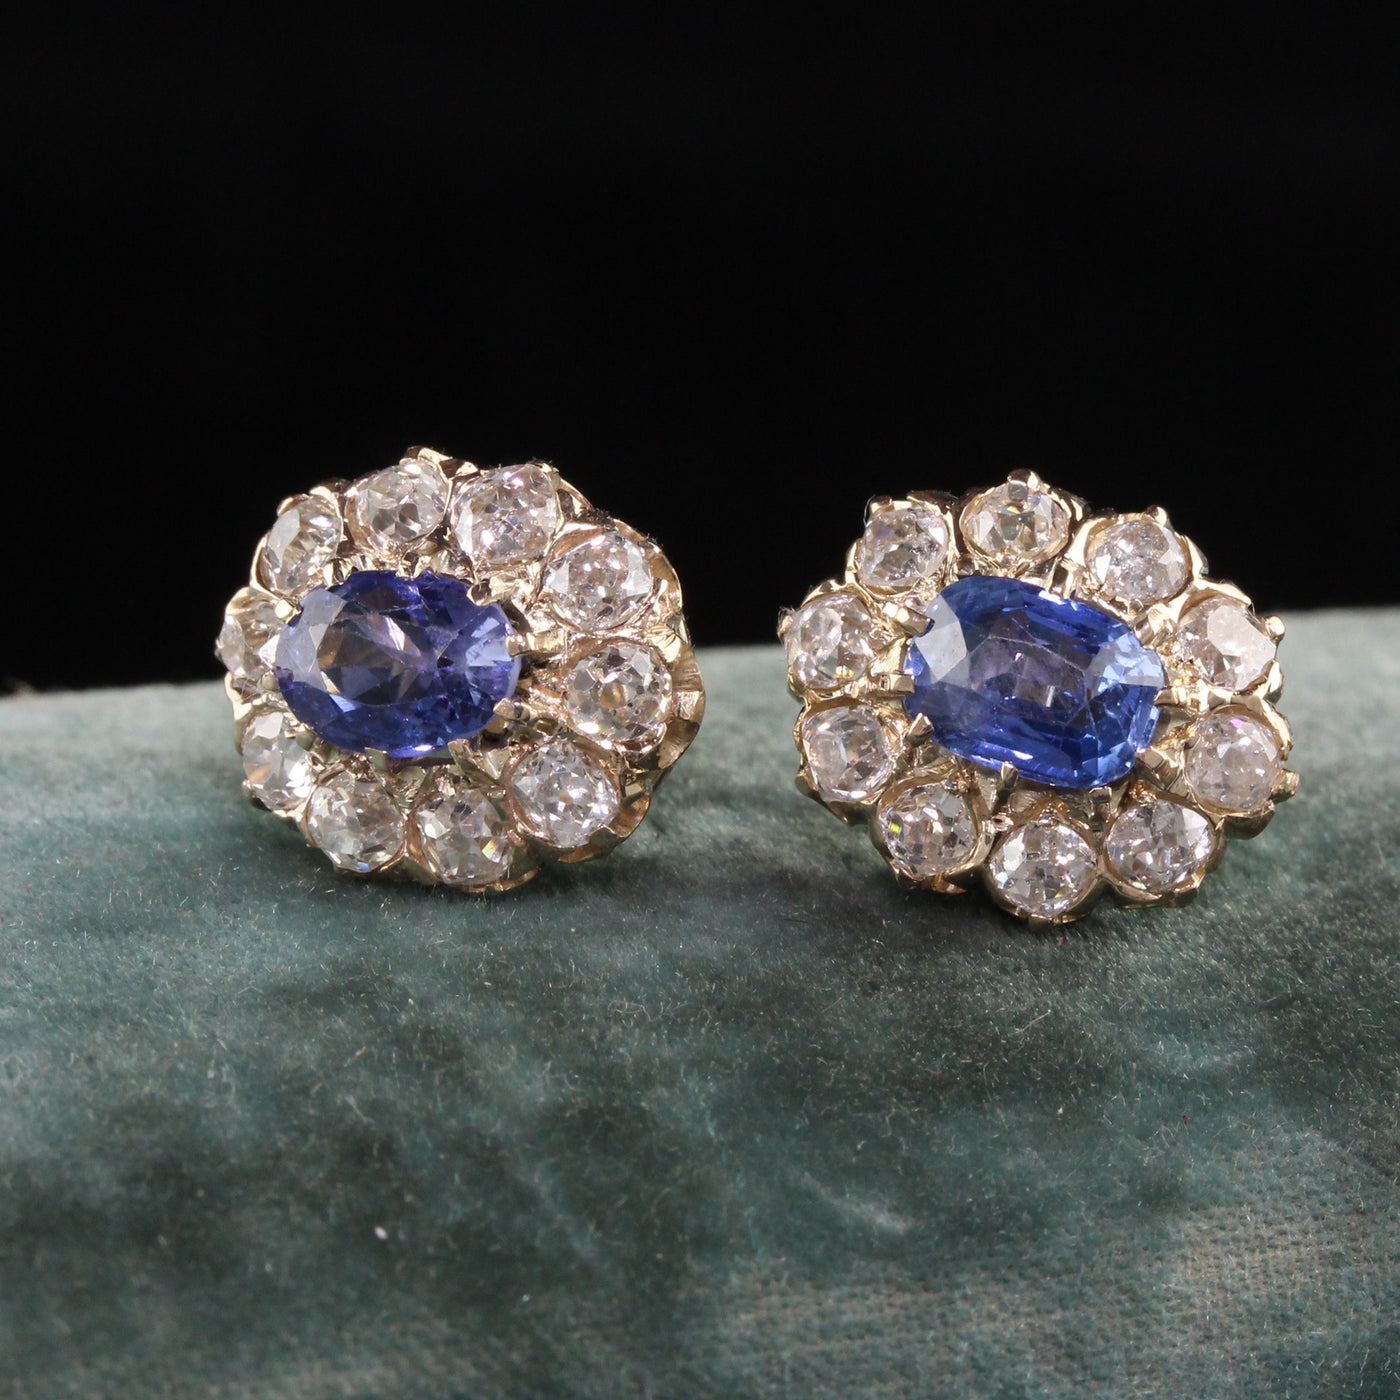 Antique Victorian 14K Yellow Gold Old Mine Diamond and Sapphire Earrings